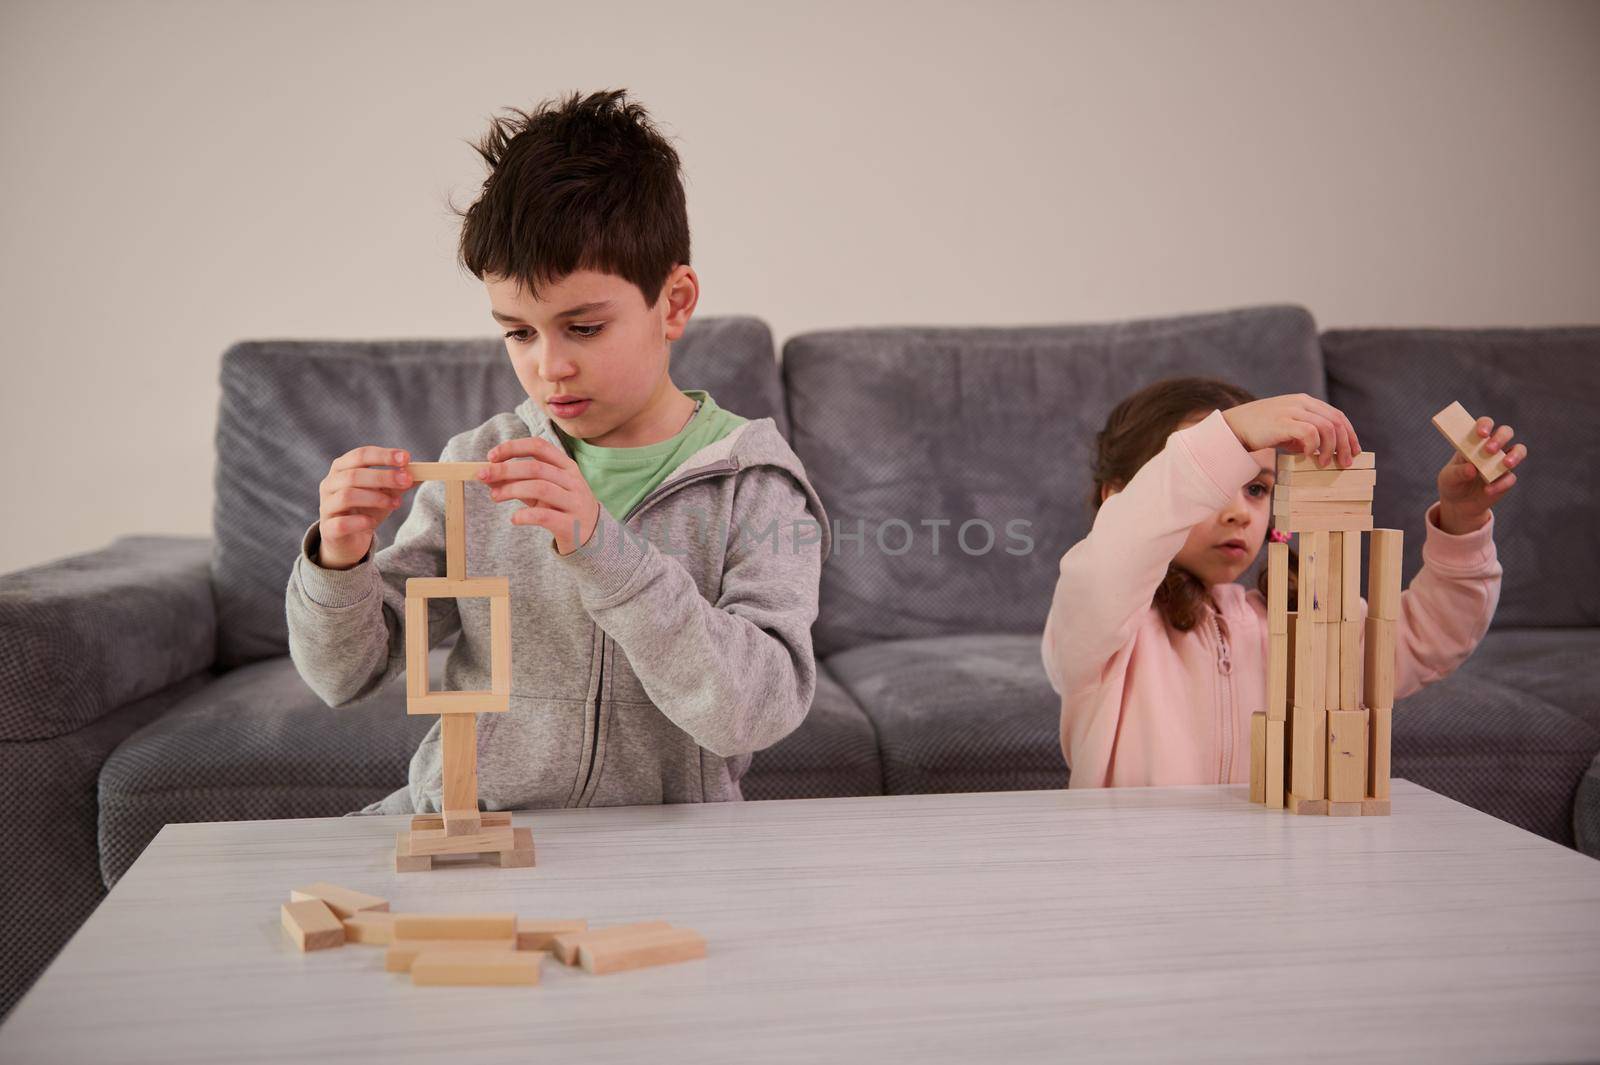 Creative children, brother and sister concentrated on building from wooden blocks, playing developmental board games, building complex tall wooden structures at home. Educational leisure and pastime by artgf